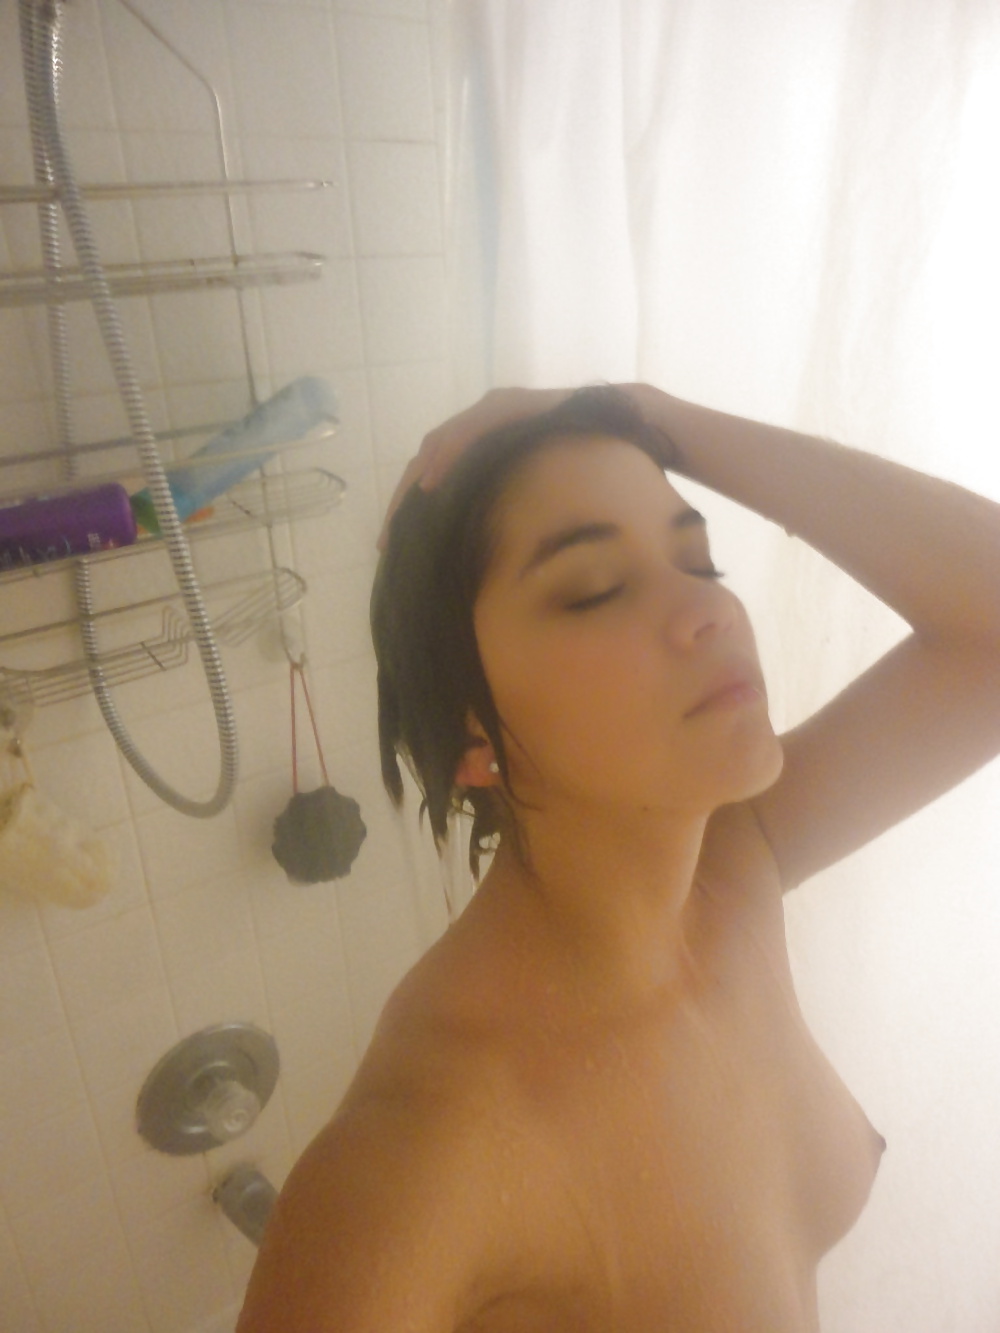 Pretty girl in the shower (Amateur) #29176923